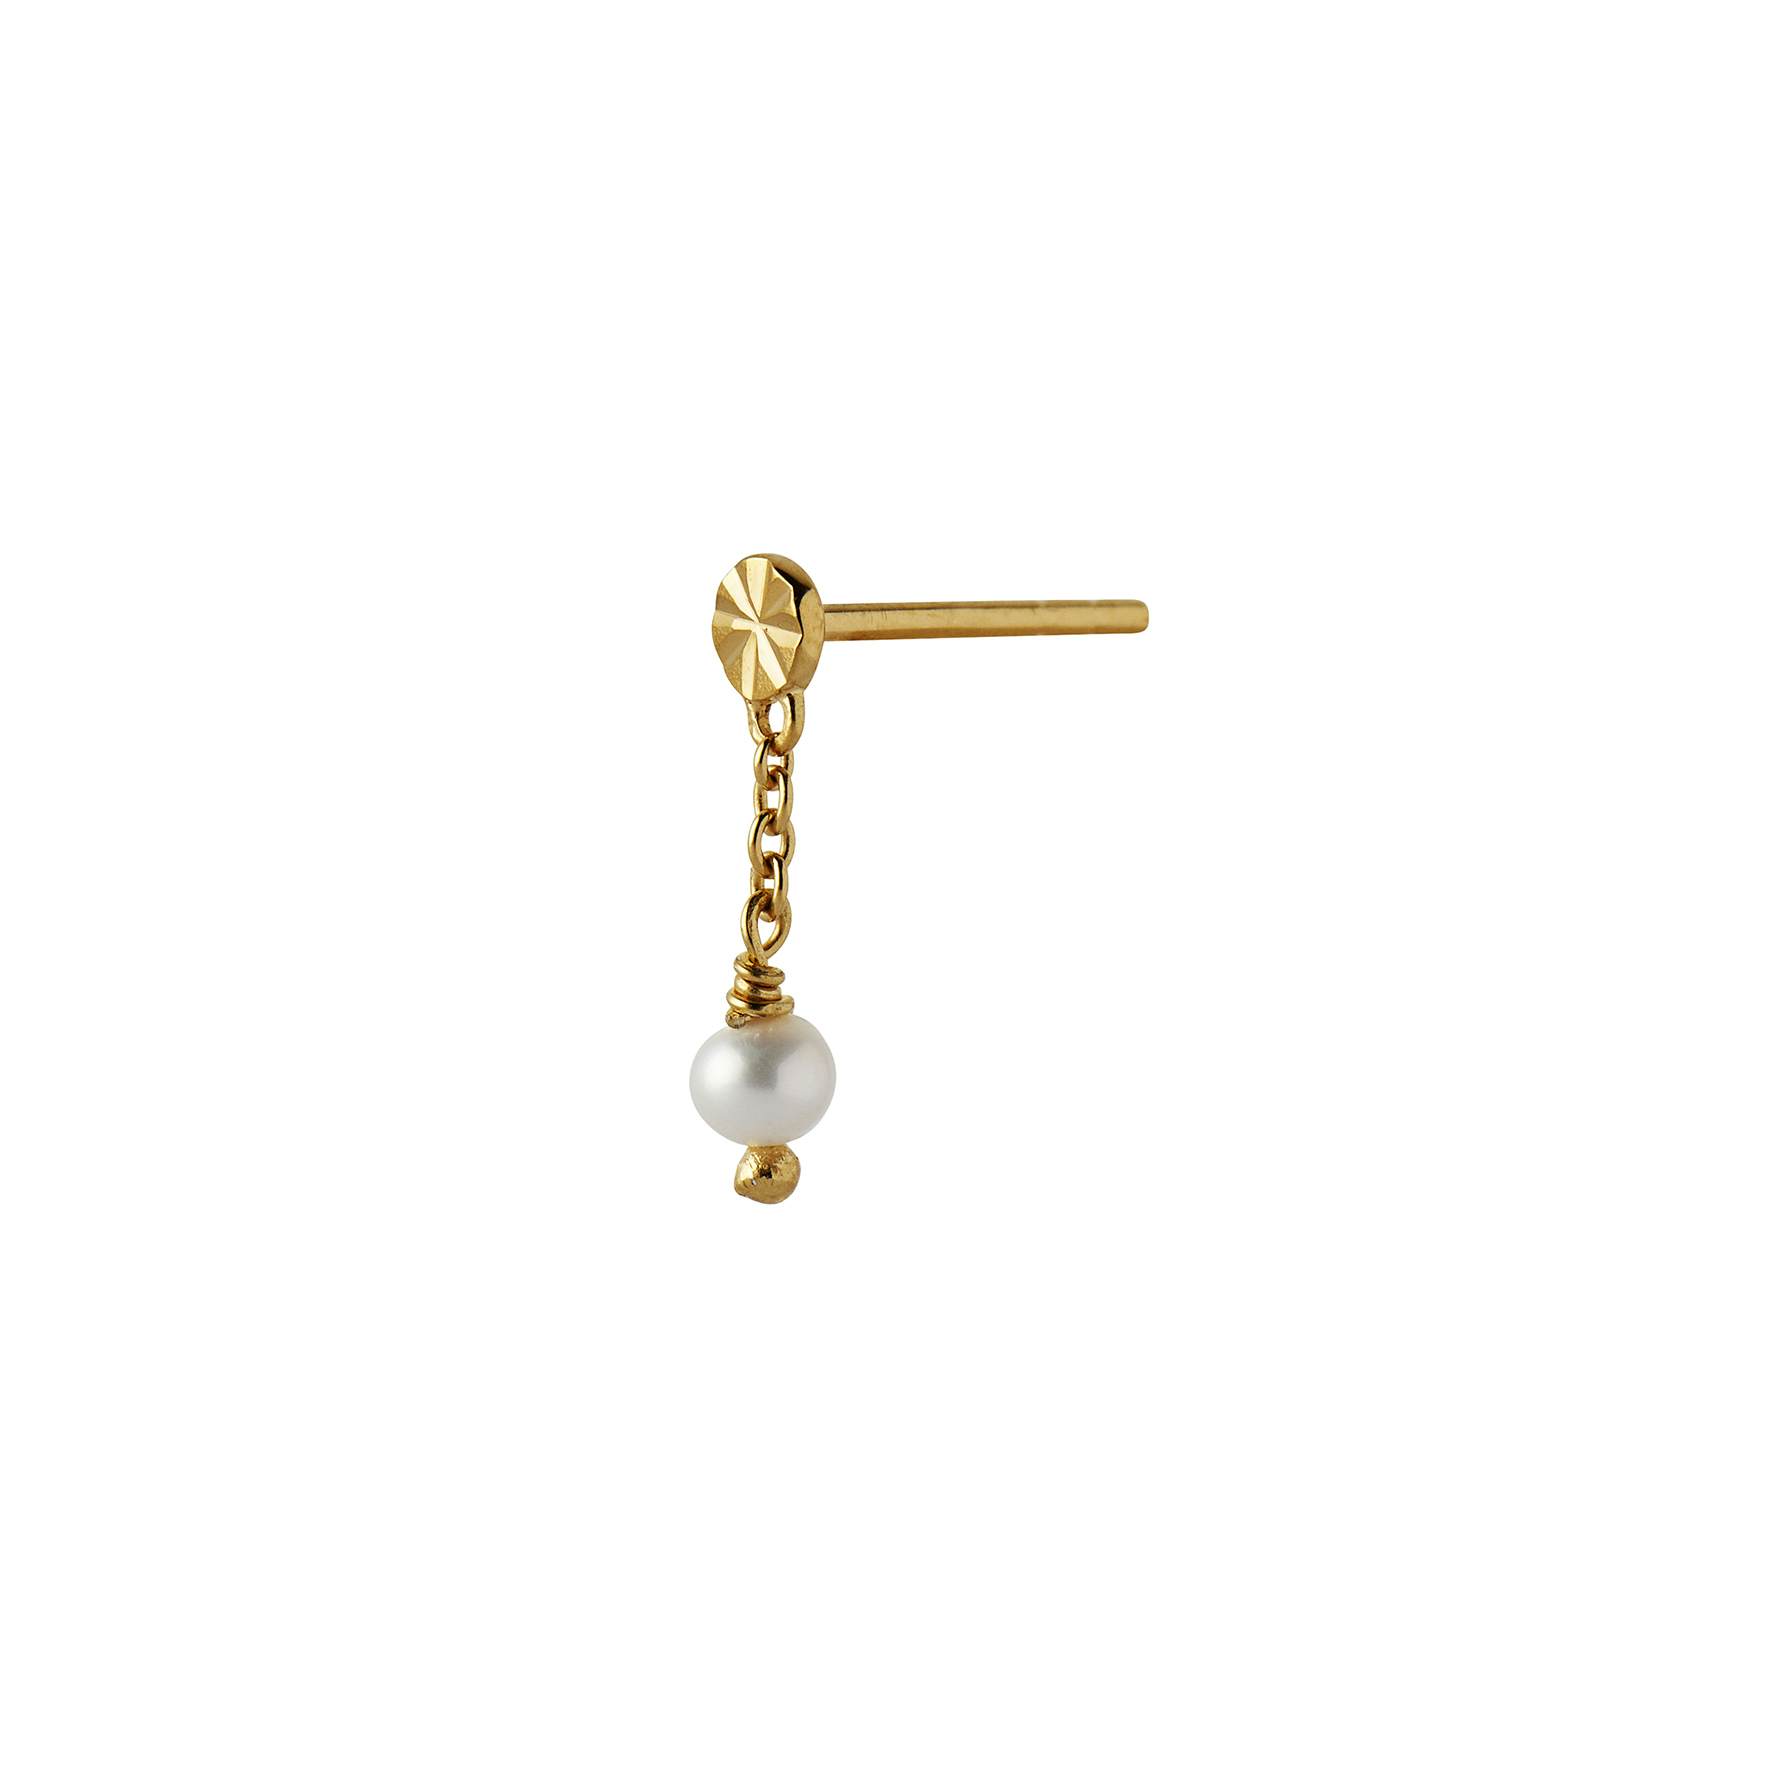 Tres Petit Etoile Earring With Pearl fra STINE A Jewelry i Forgyldt-Sølv Sterling 925